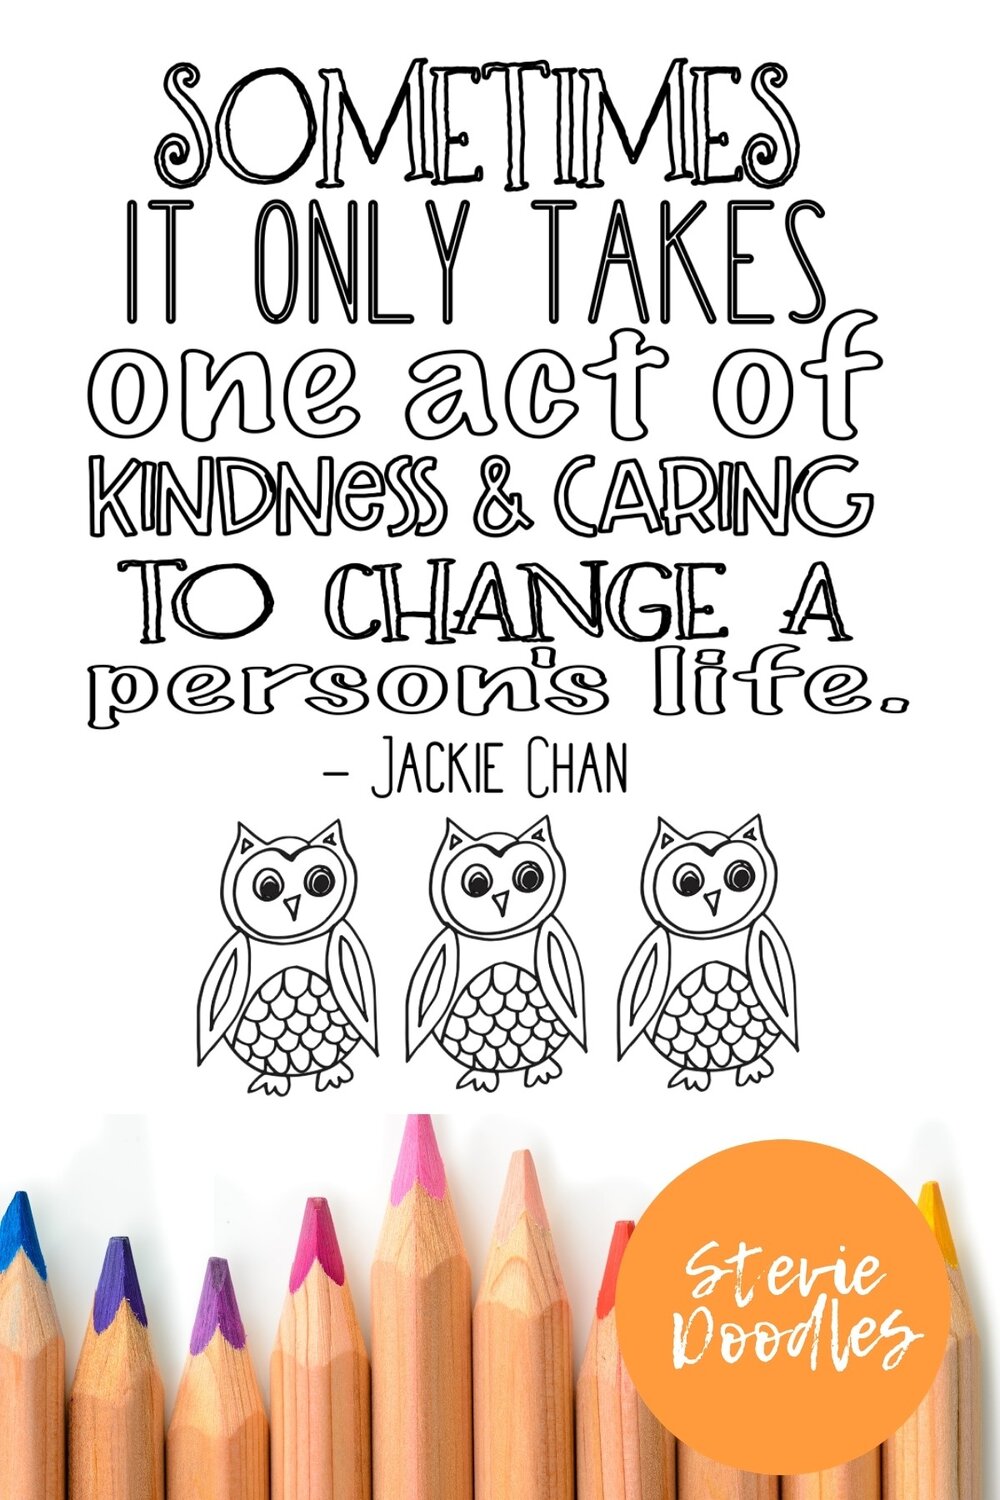 free coloring page with owls kindness quote stevie doodles free printable coloring pages